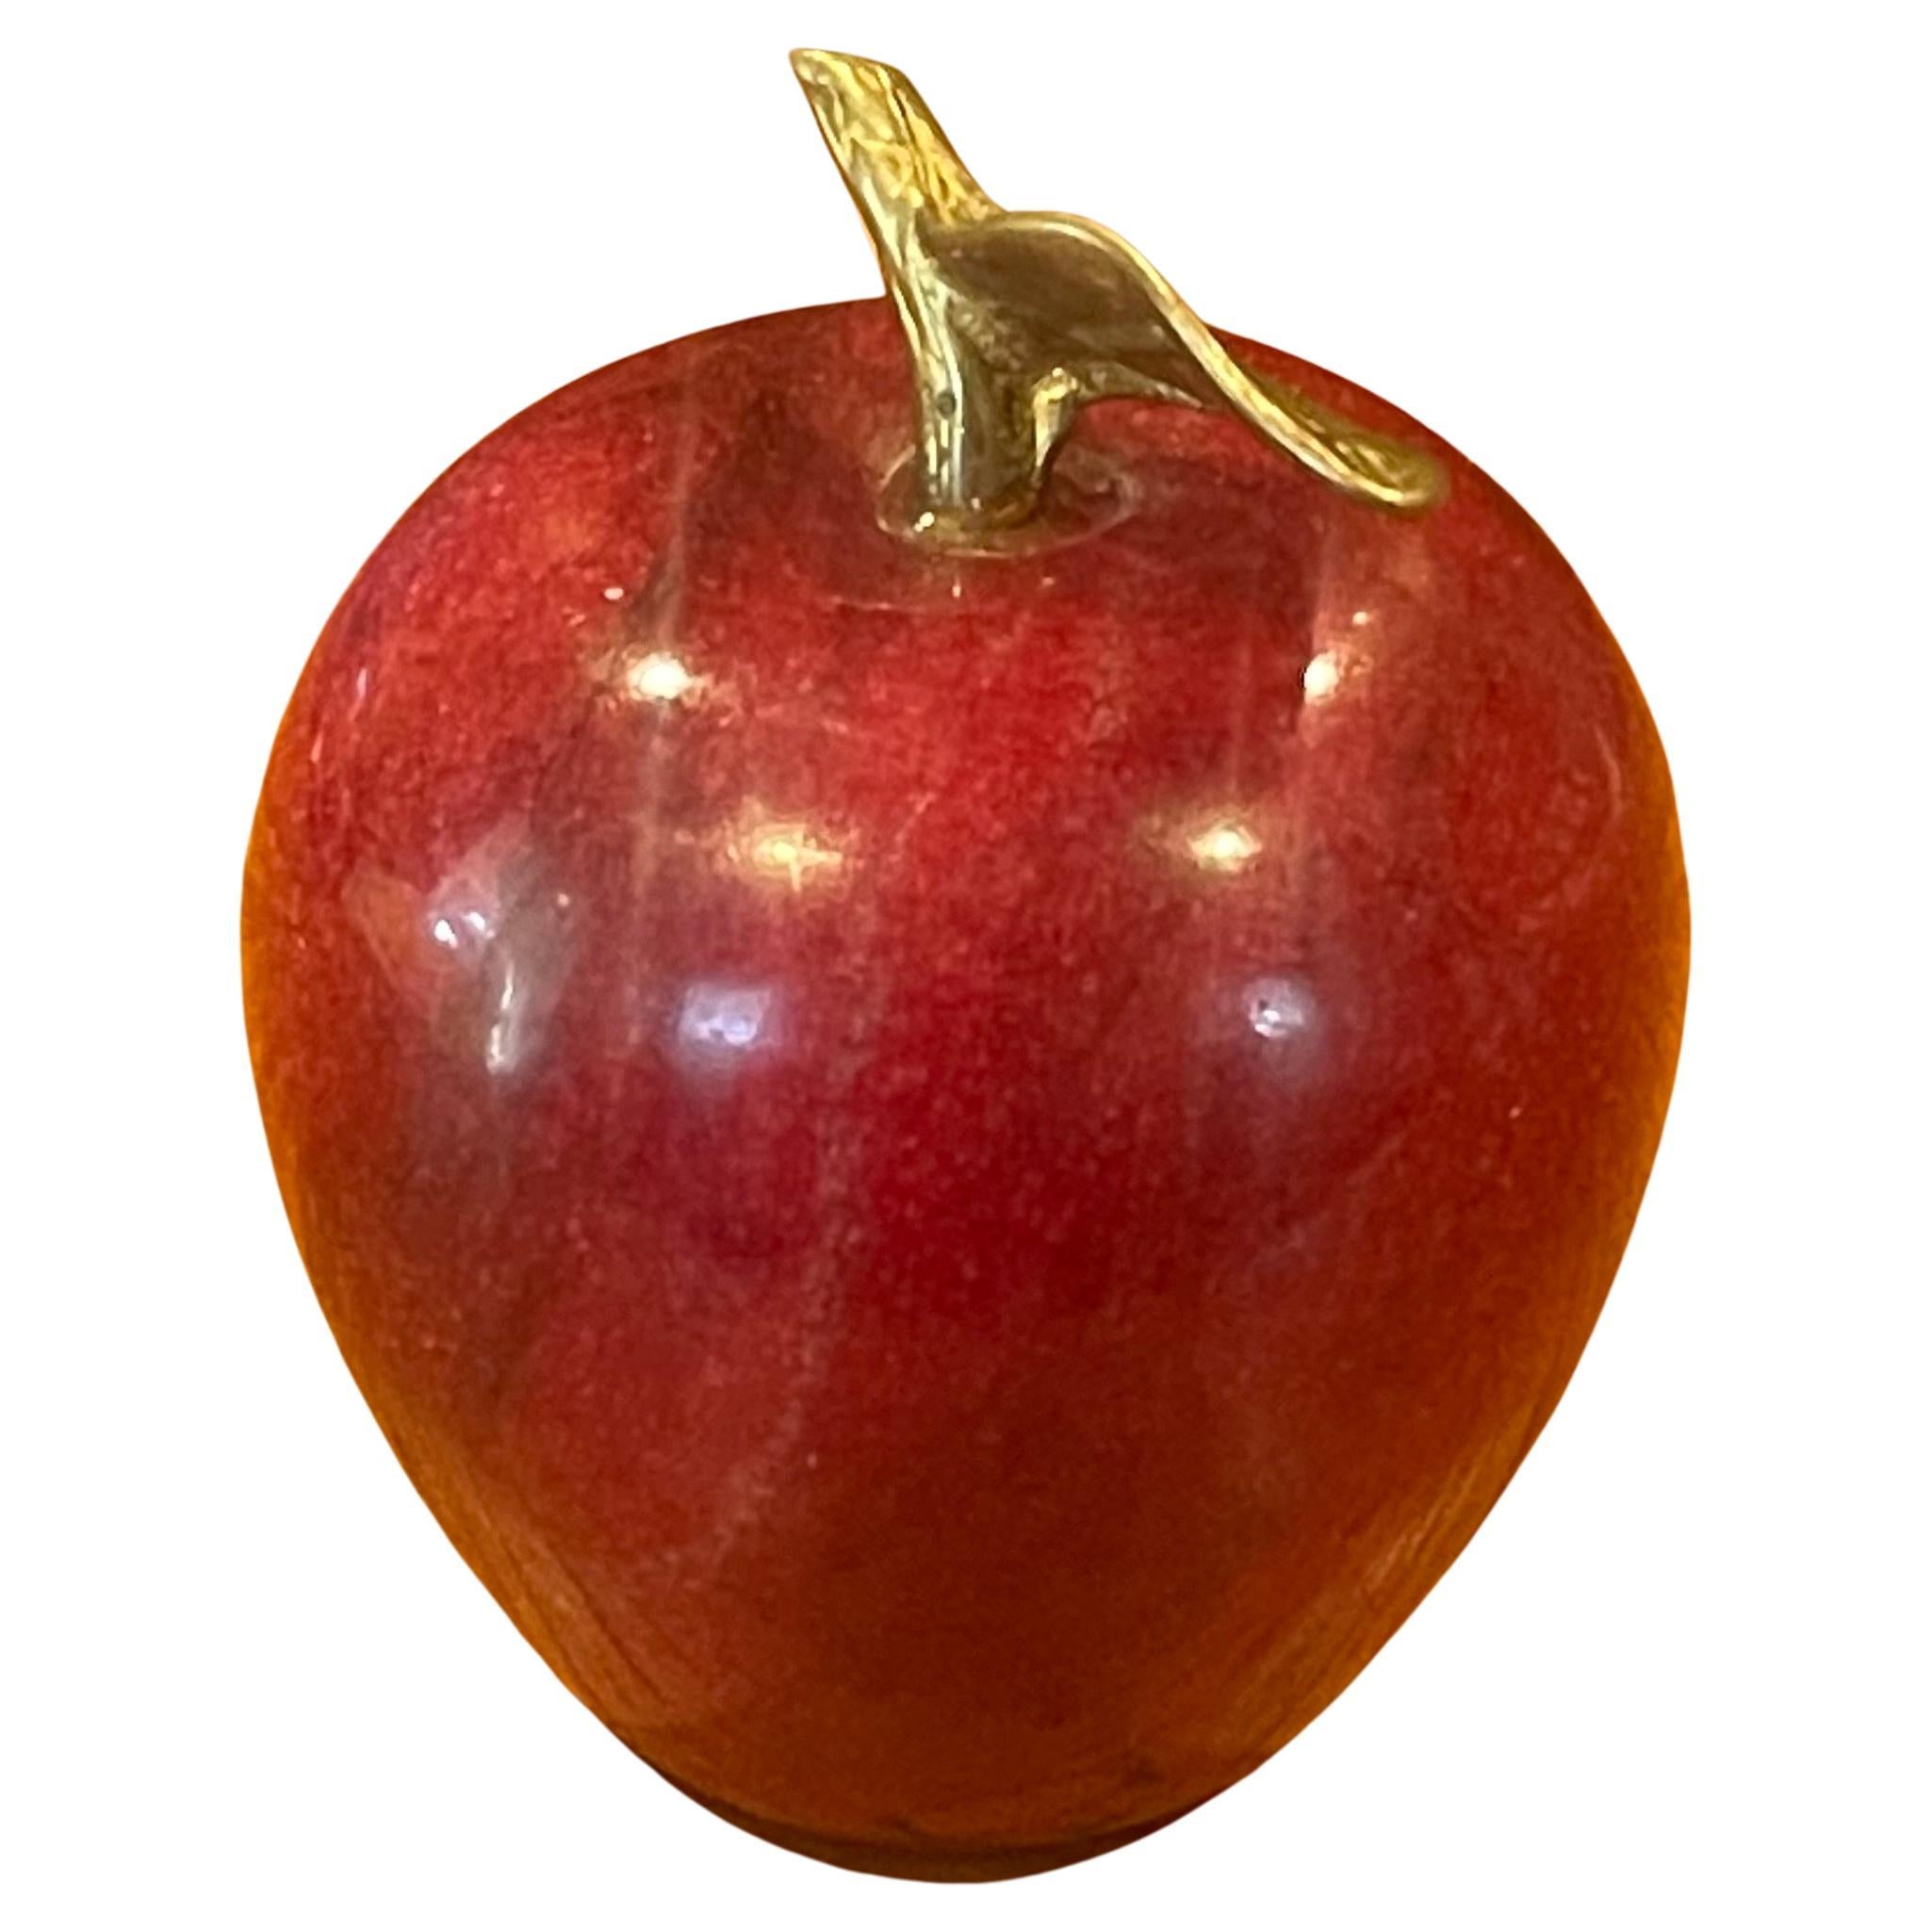 Solid red marble with brass accent stem apple paperweight or sculpture, circa 1970s. The piece is in very good vintage condition with no chips or cracks and measures 3